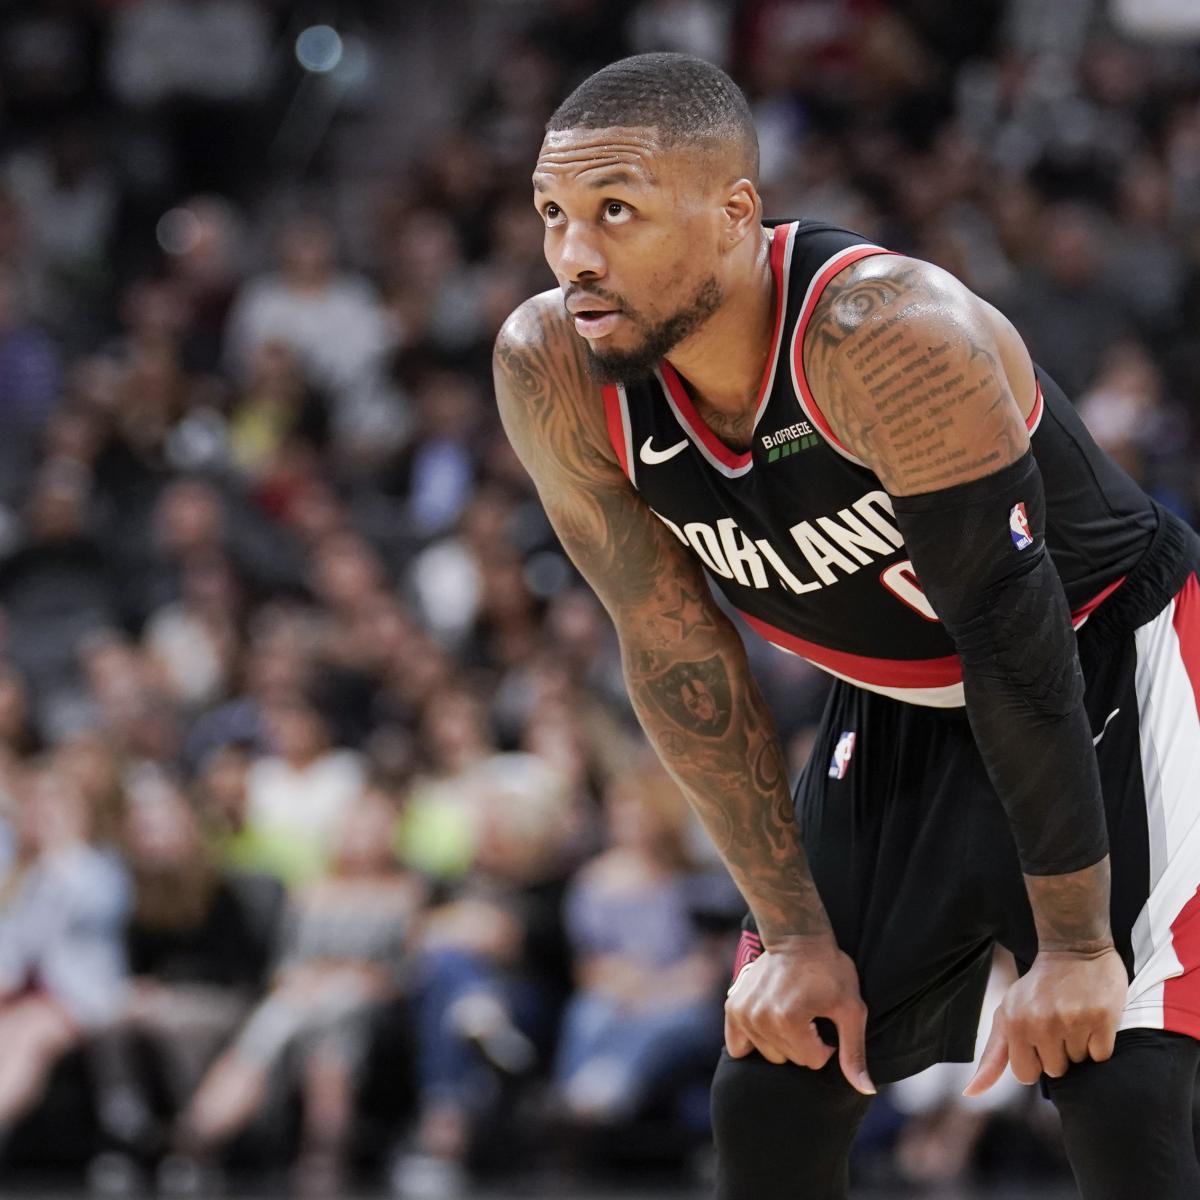 Damian Lillard Named Reserve for 2020 NBA All-Star Game, Compete